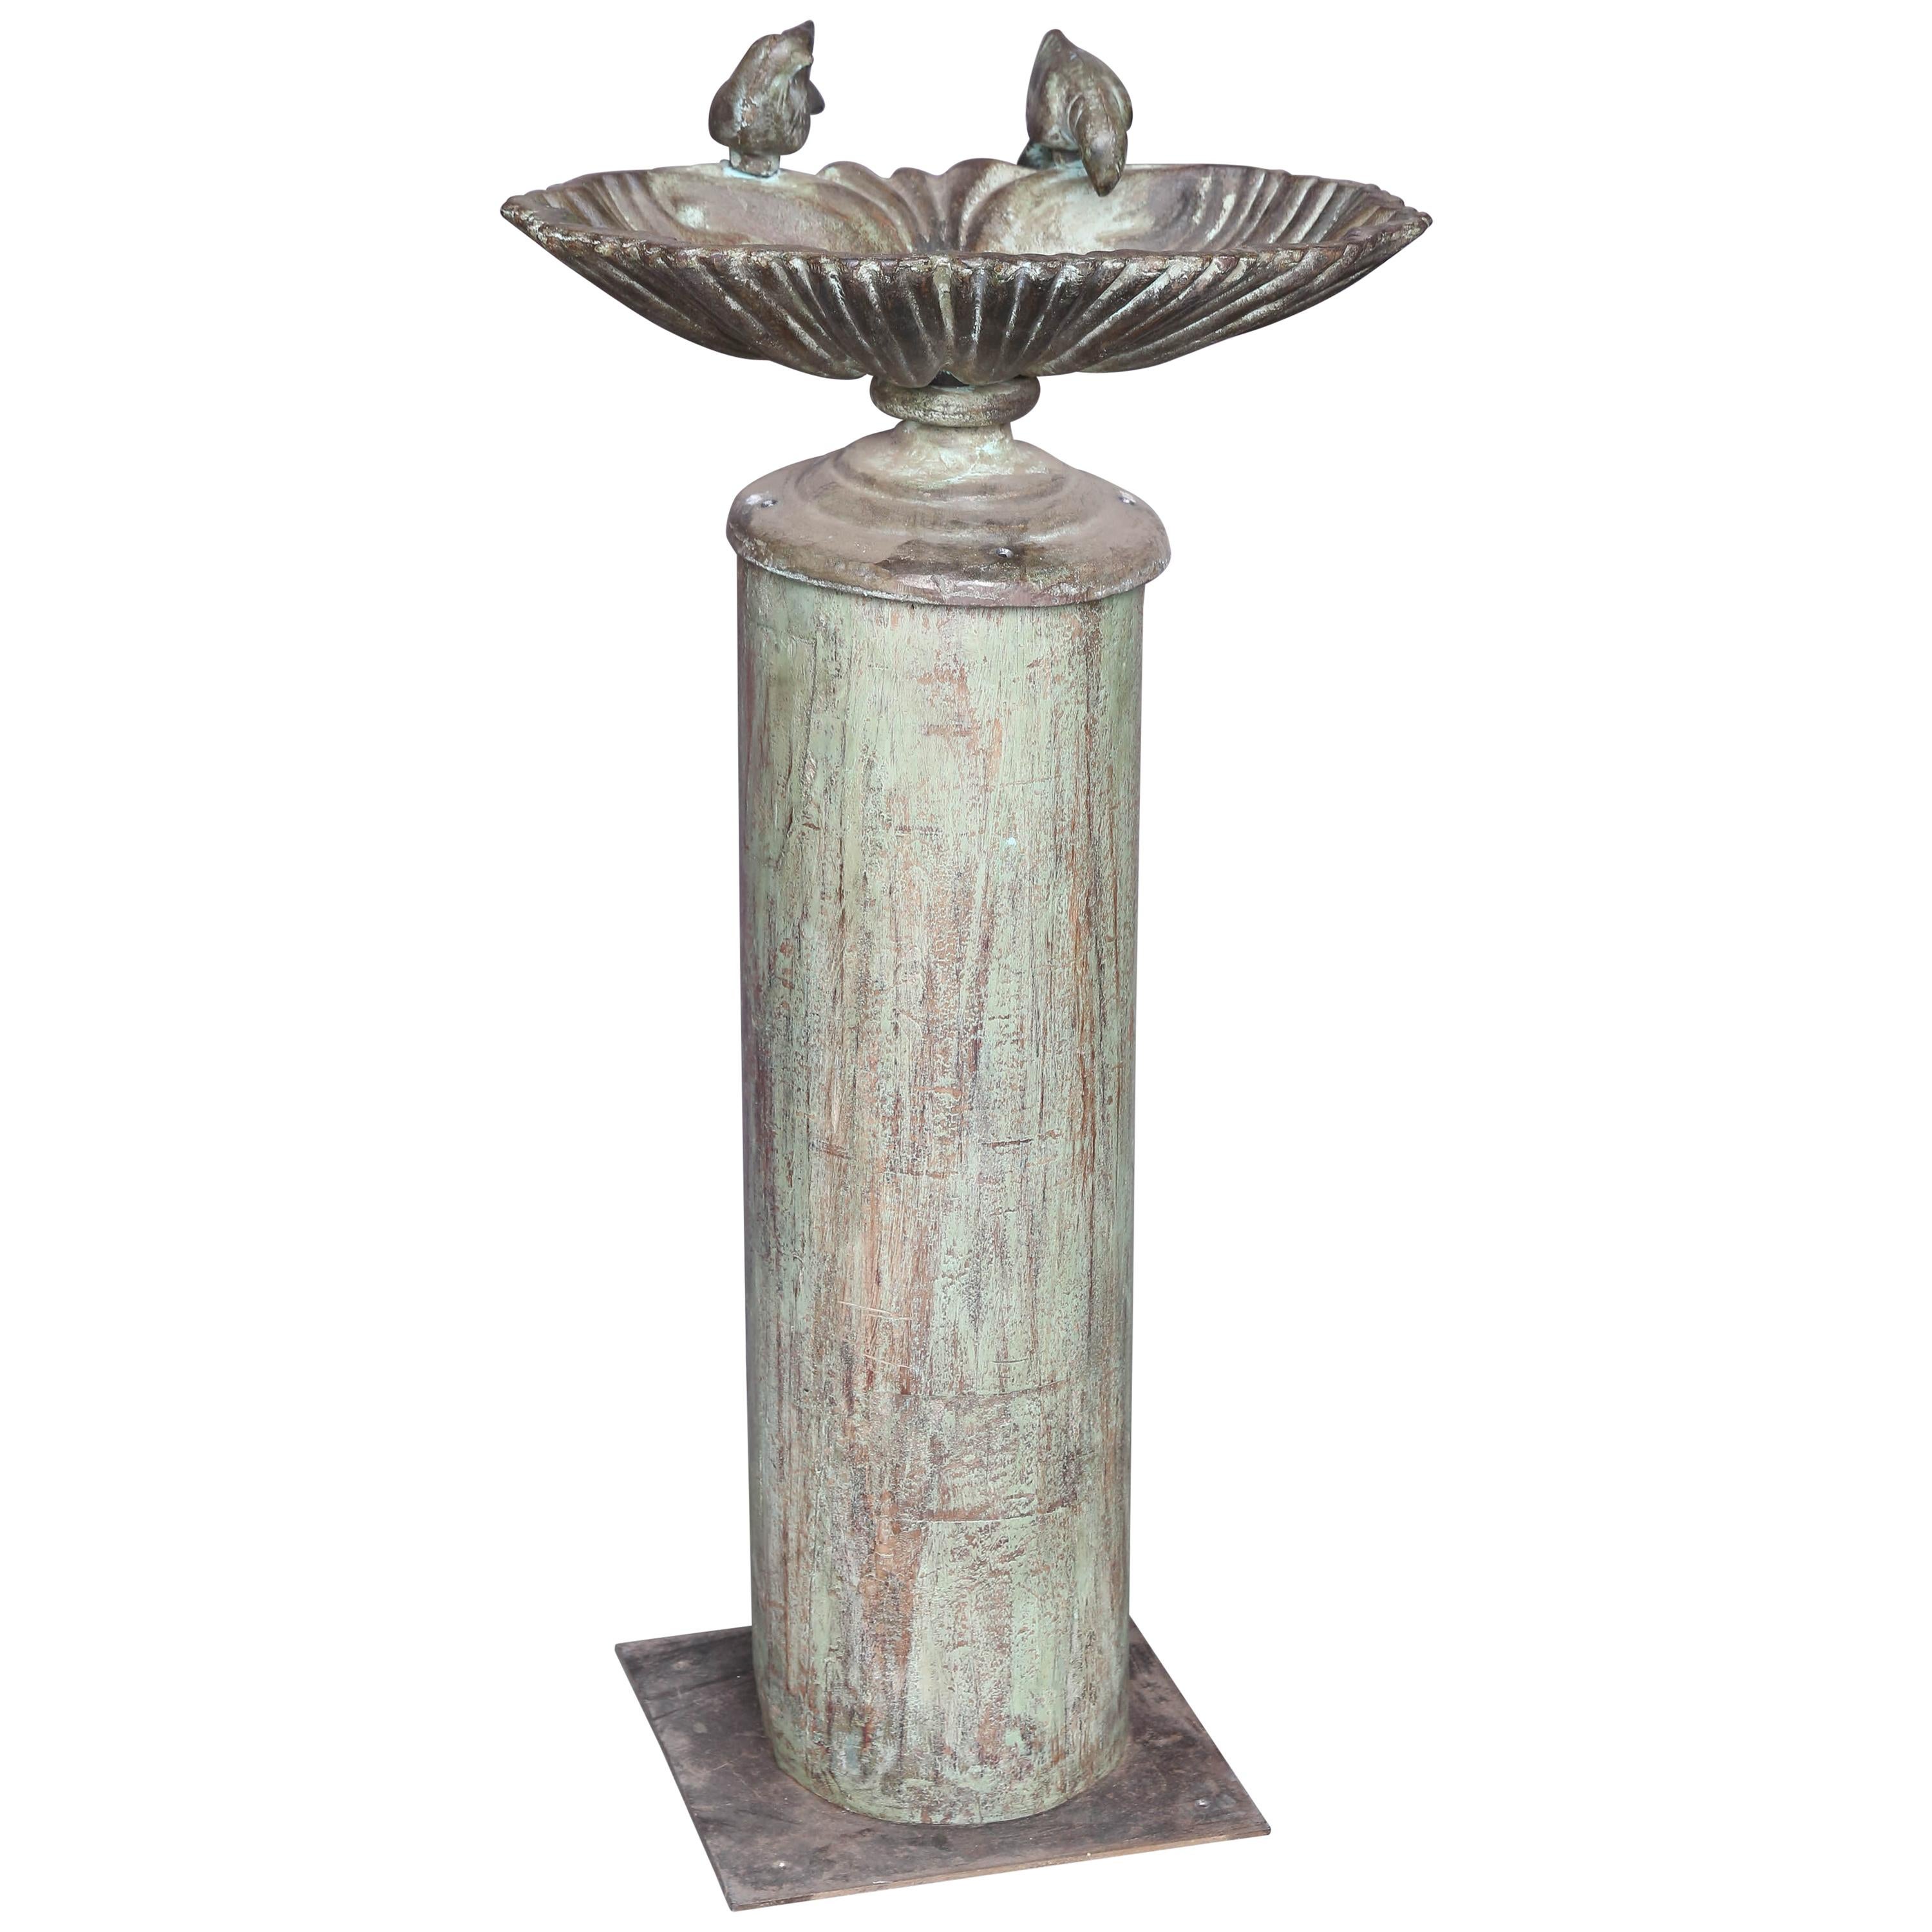 Cute Cast Iron Bird Bath from the Back Yard Garden of a Colonial Home